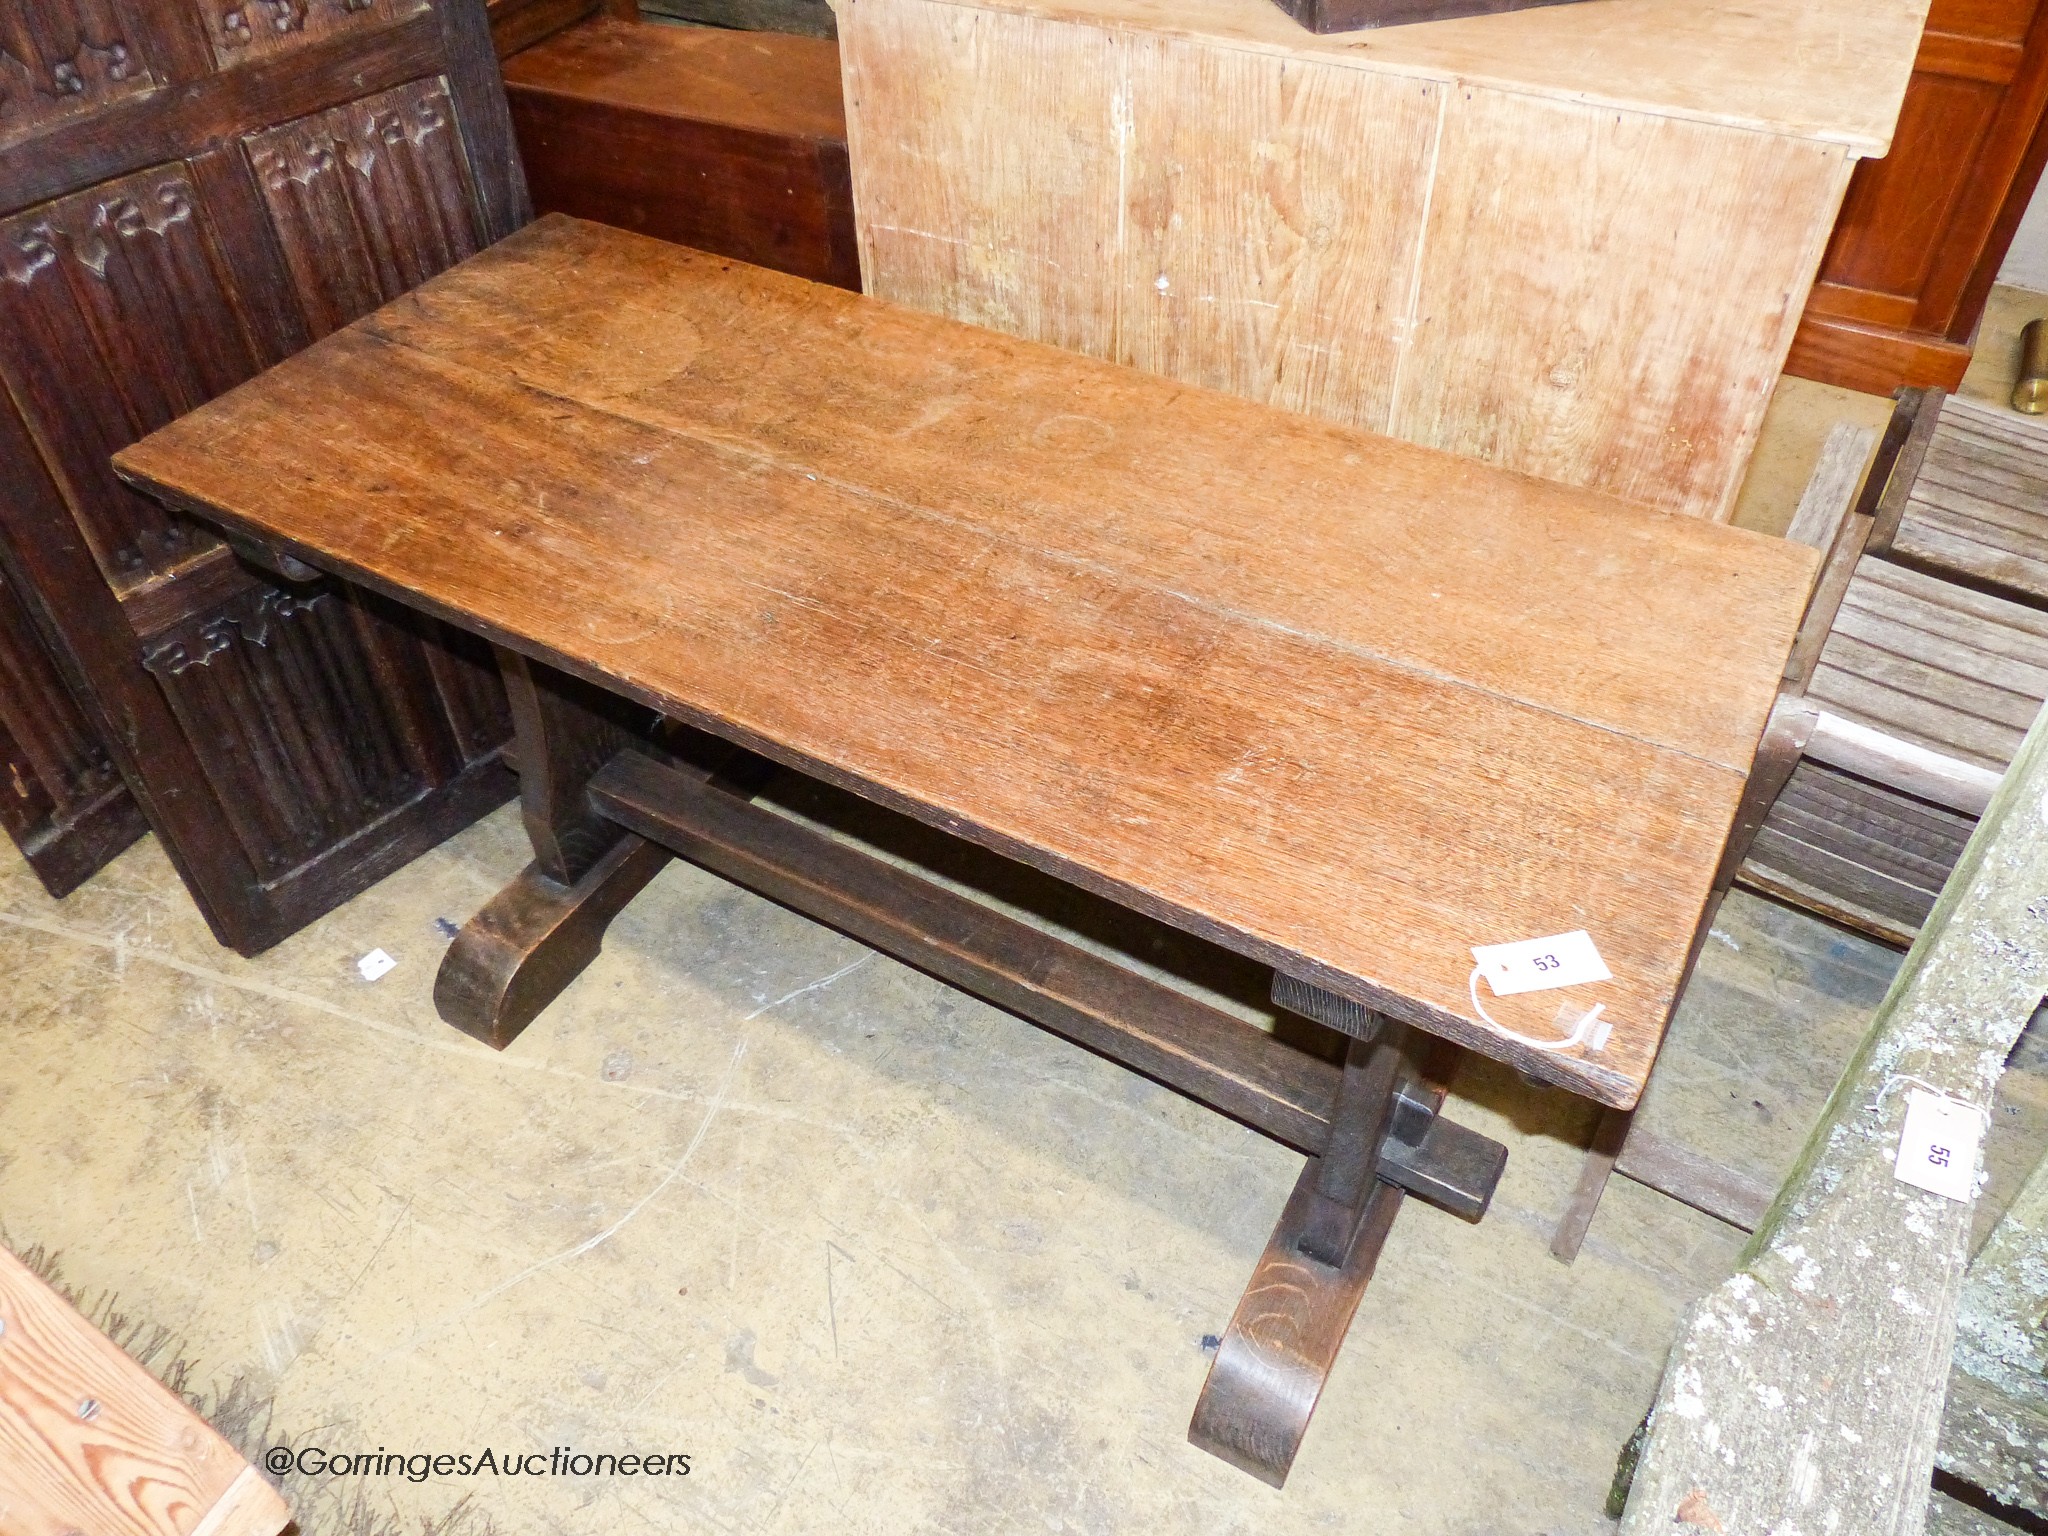 A small 18th century style oak refectory table, length 126cm, depth 55cm, height 71cm